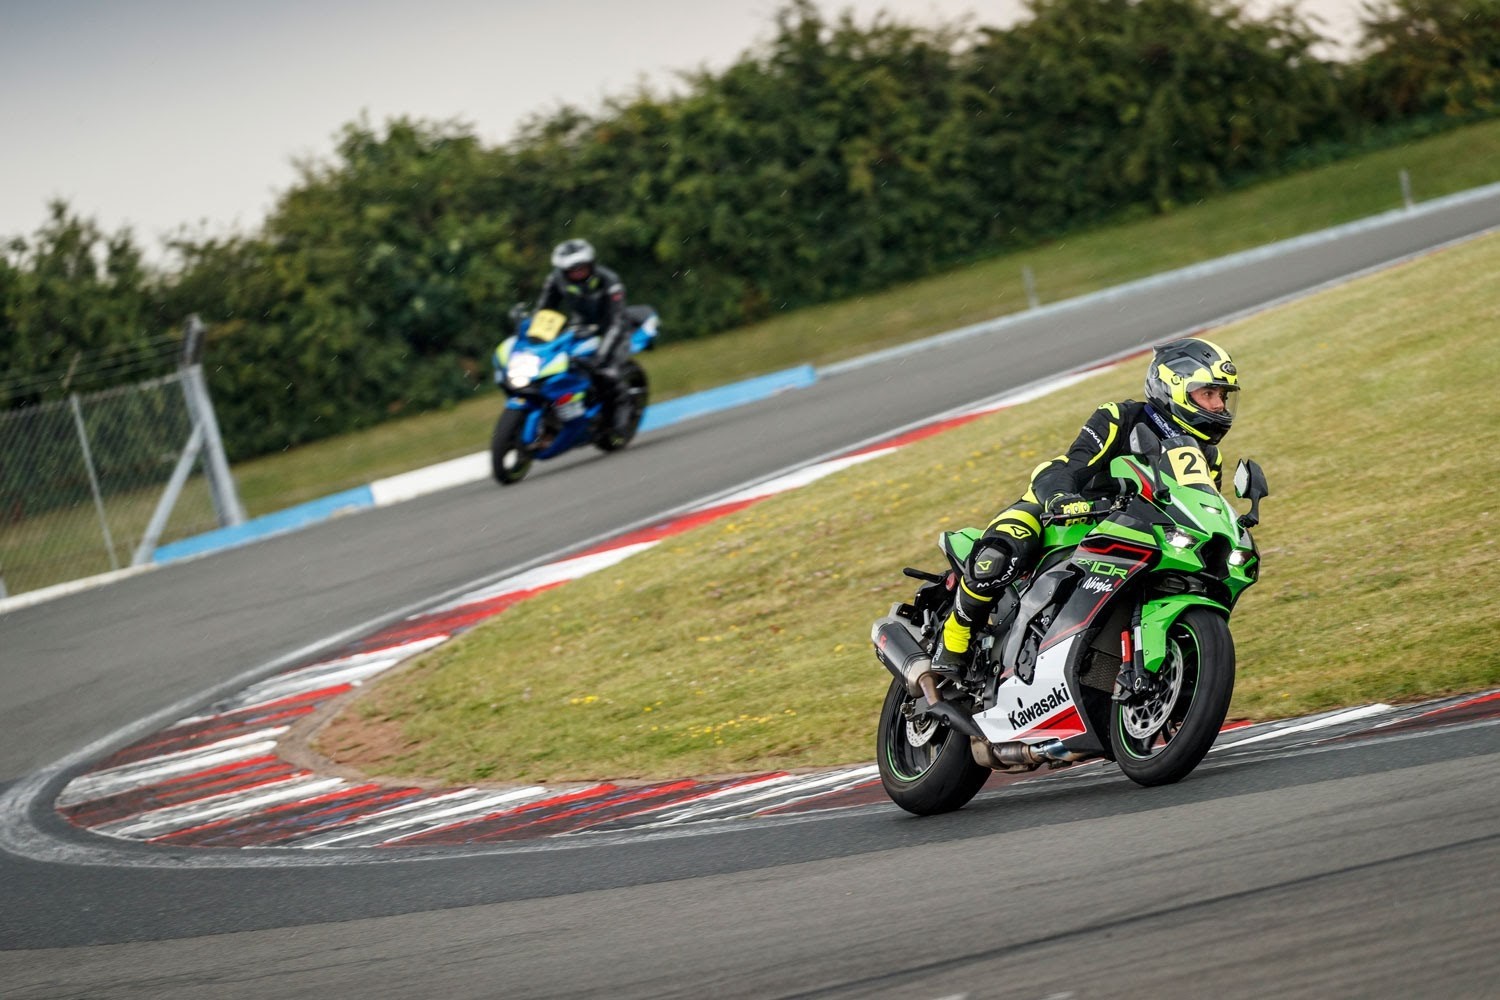 Riding on a track day will help your road riding no end, but insurance isn't compulsory